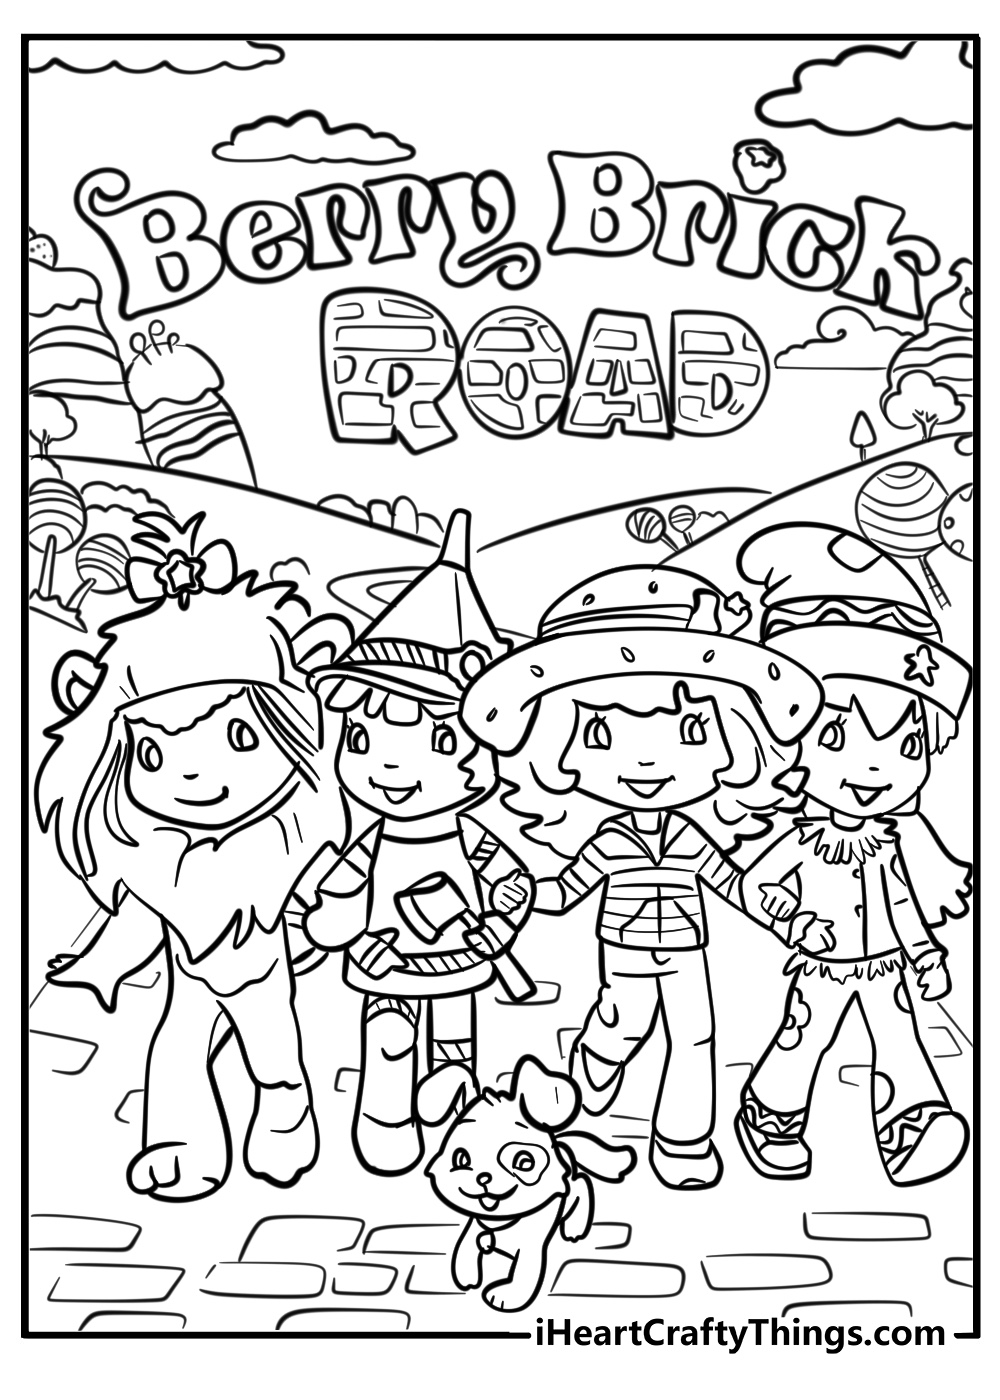 Strawberry shortcake coloring page and the berry brick road